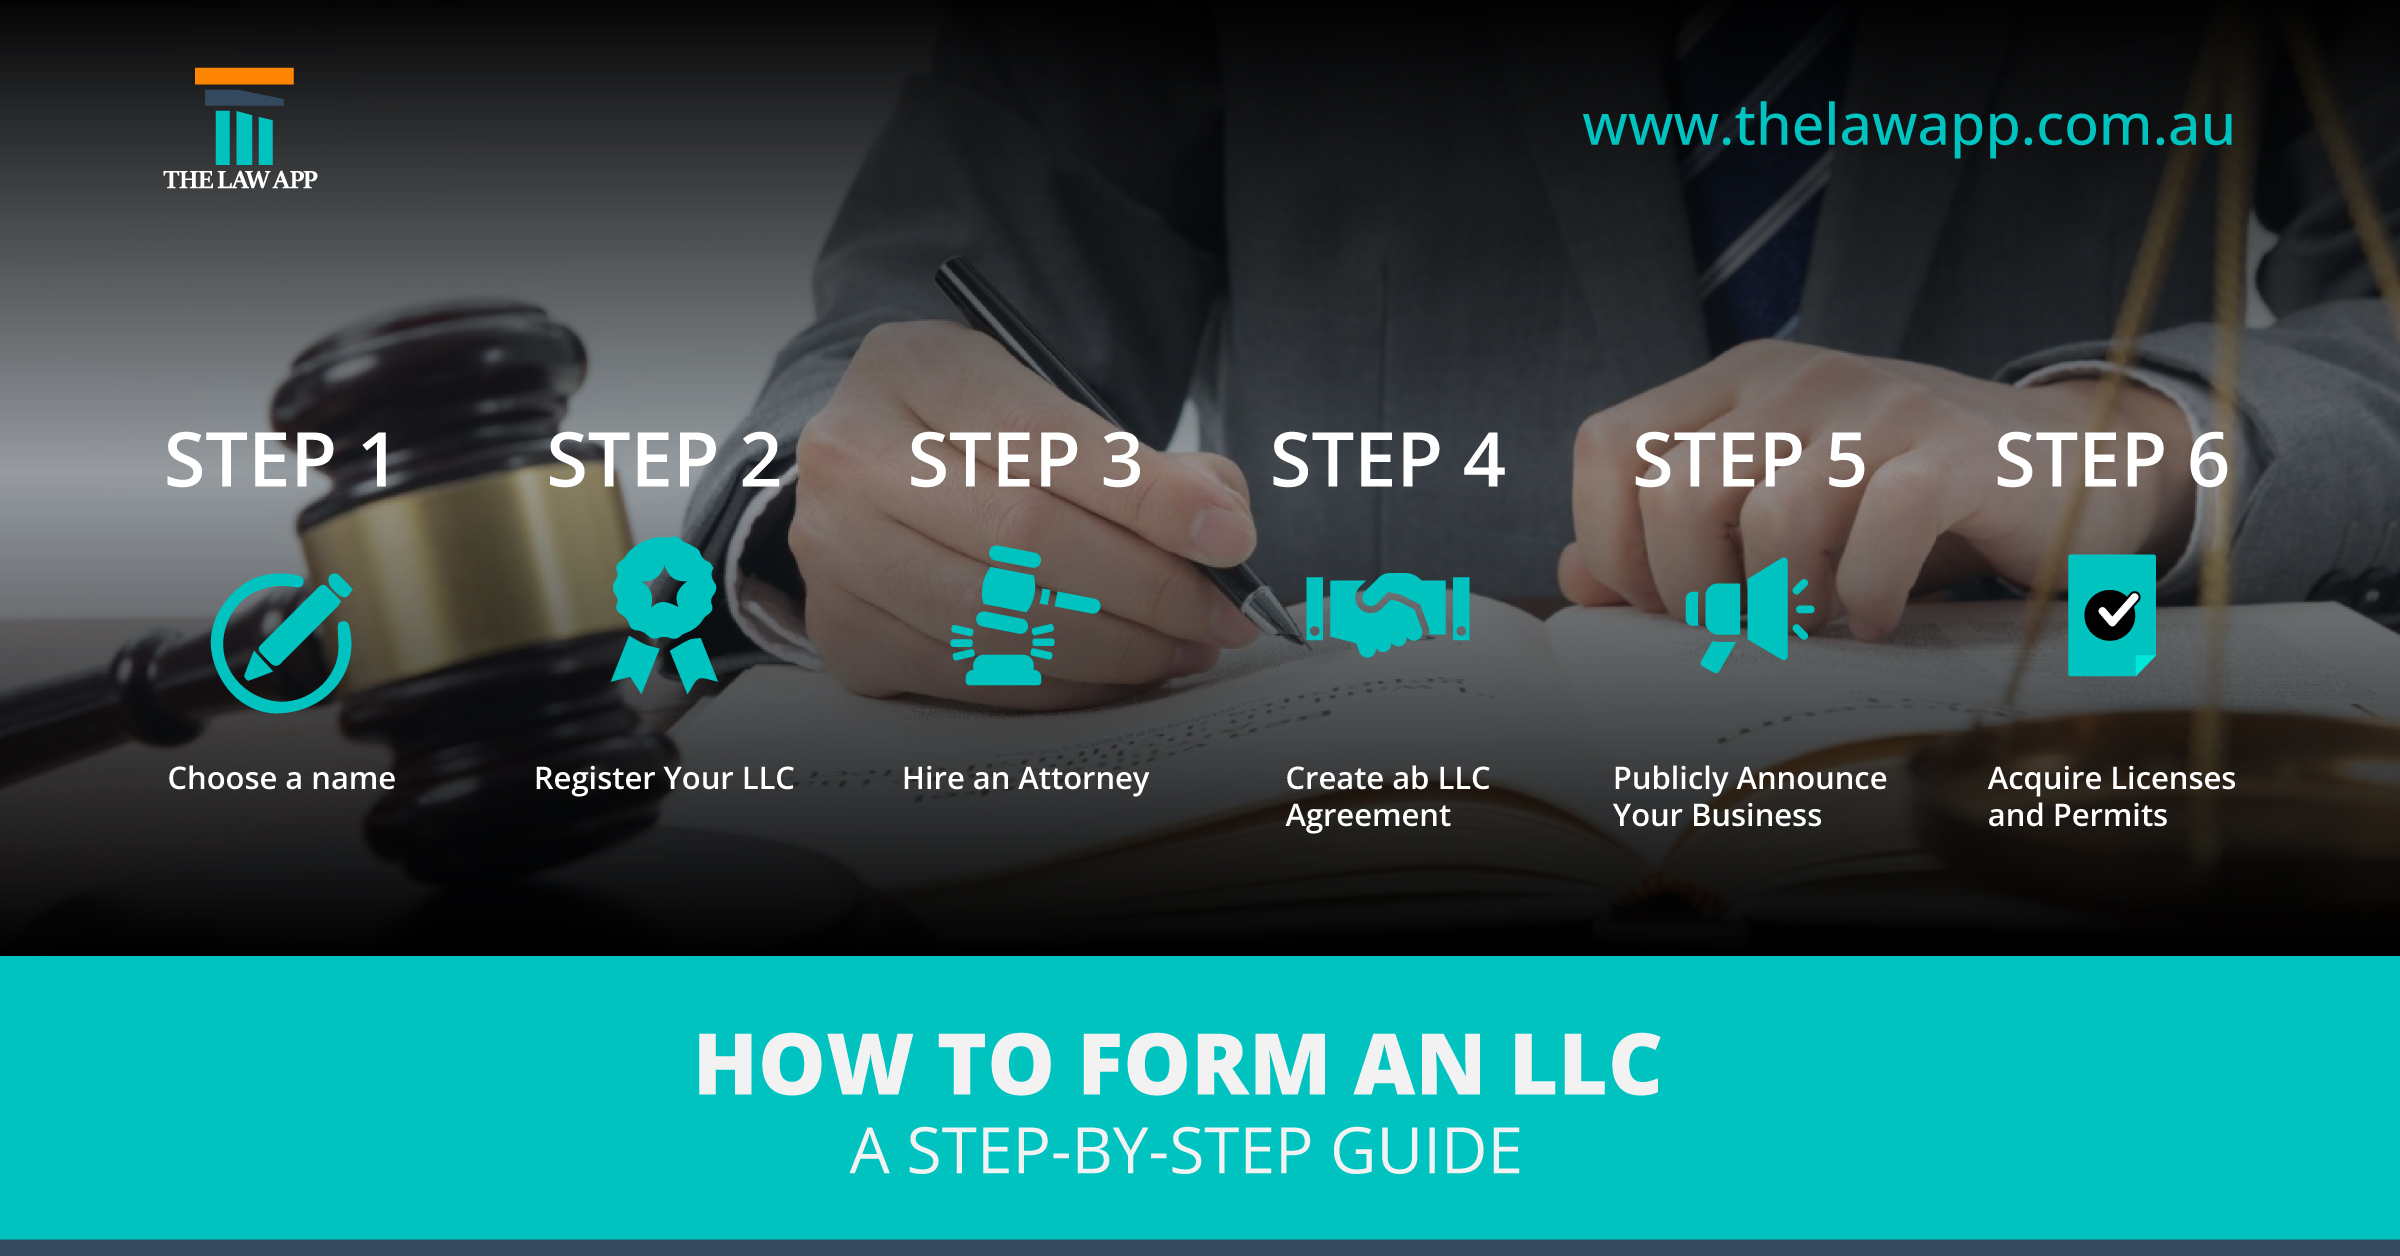 How to Form an LLC: A Step-by-Step Guide